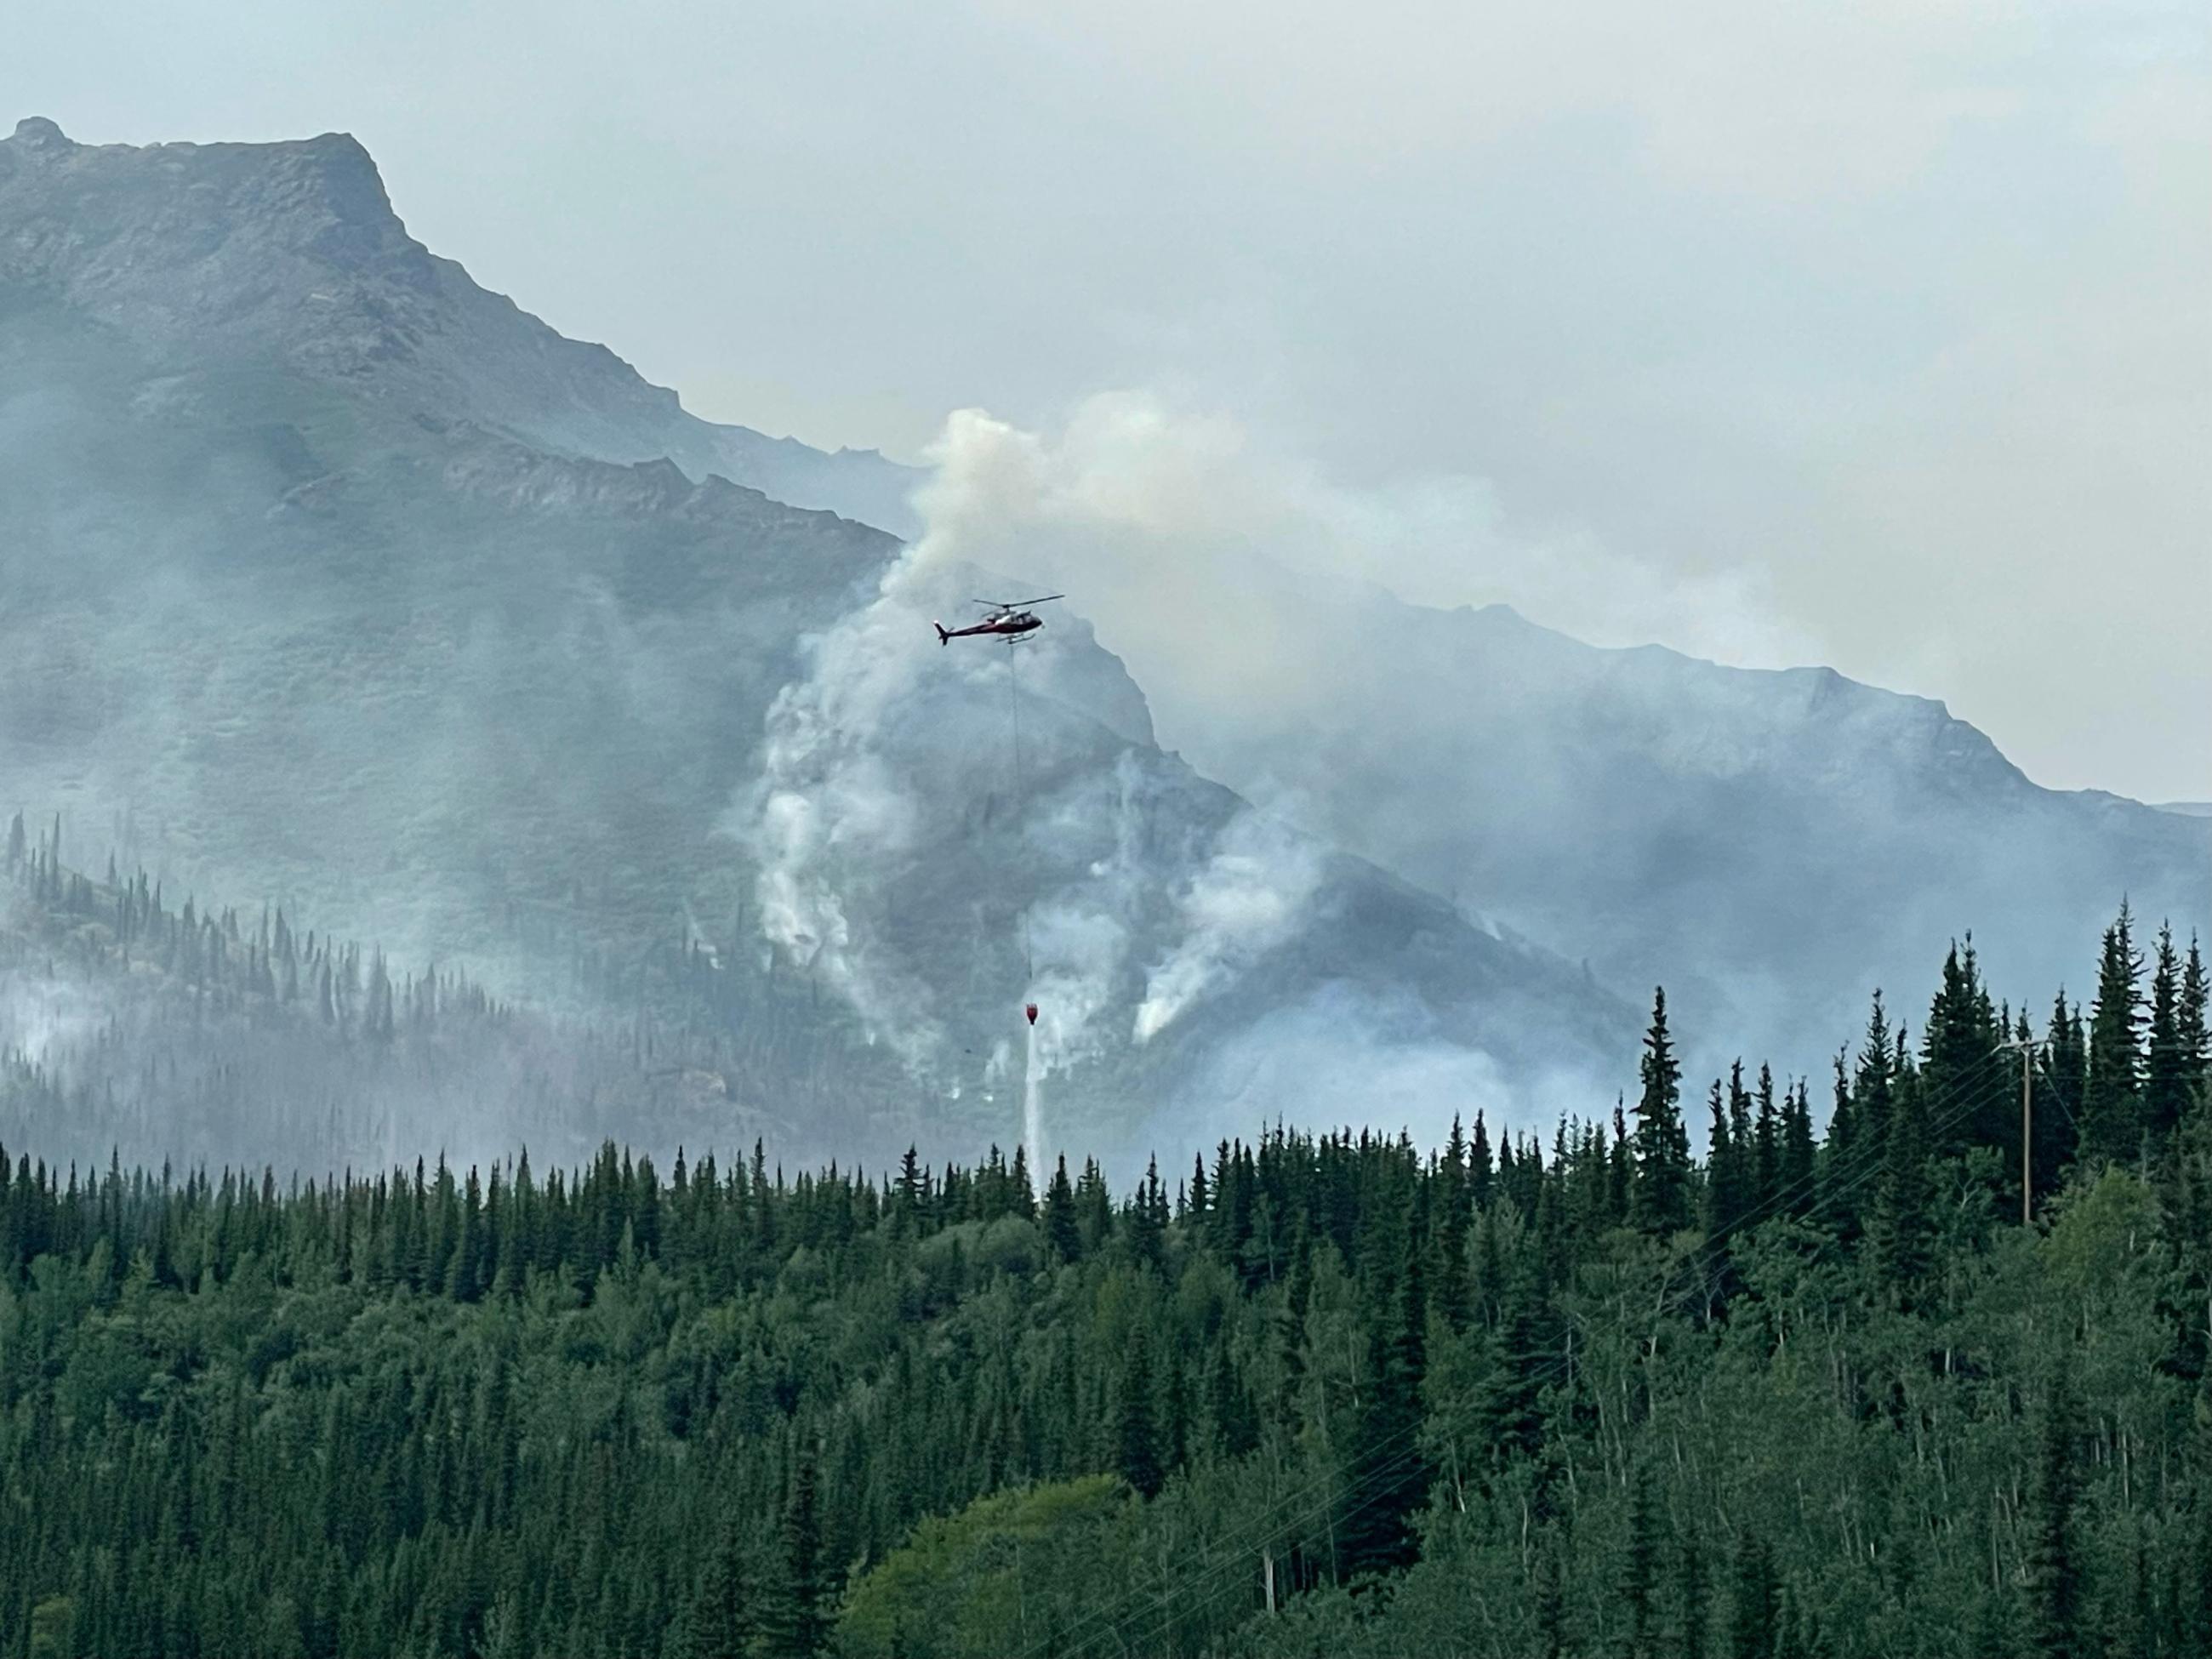 A helicopter flies through smoke to drop water on the fire.